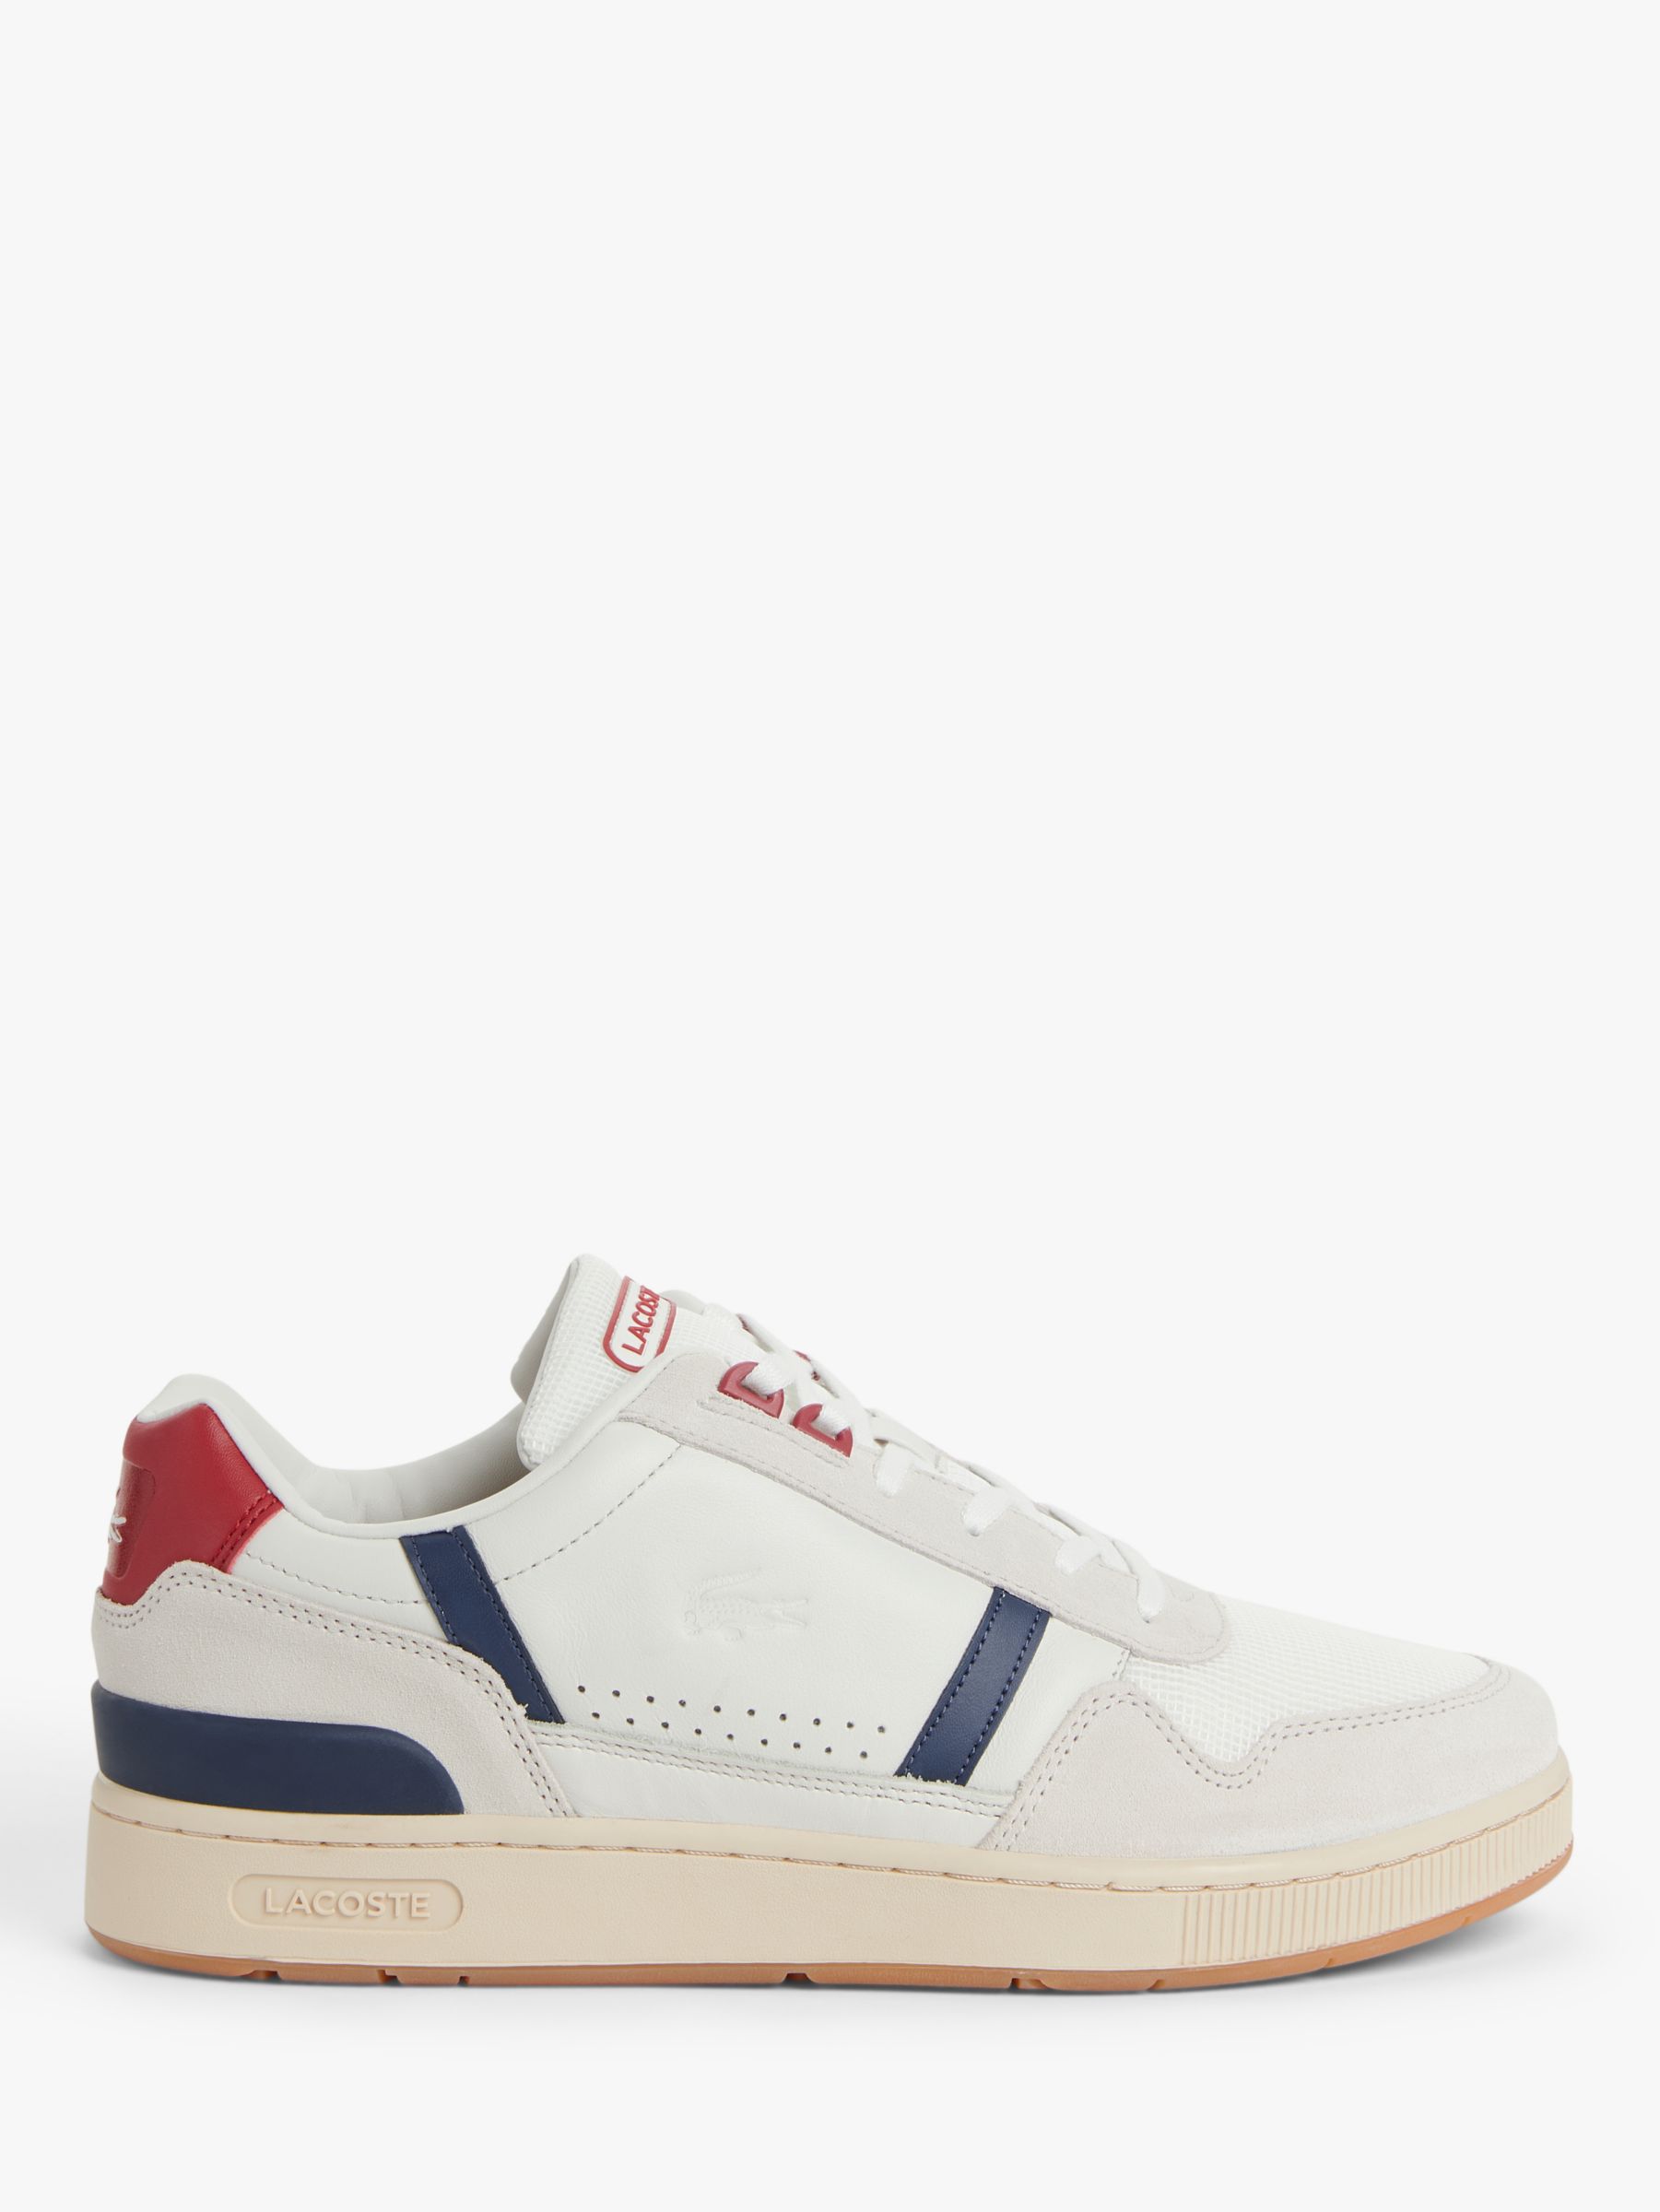 john lewis lacoste trainers